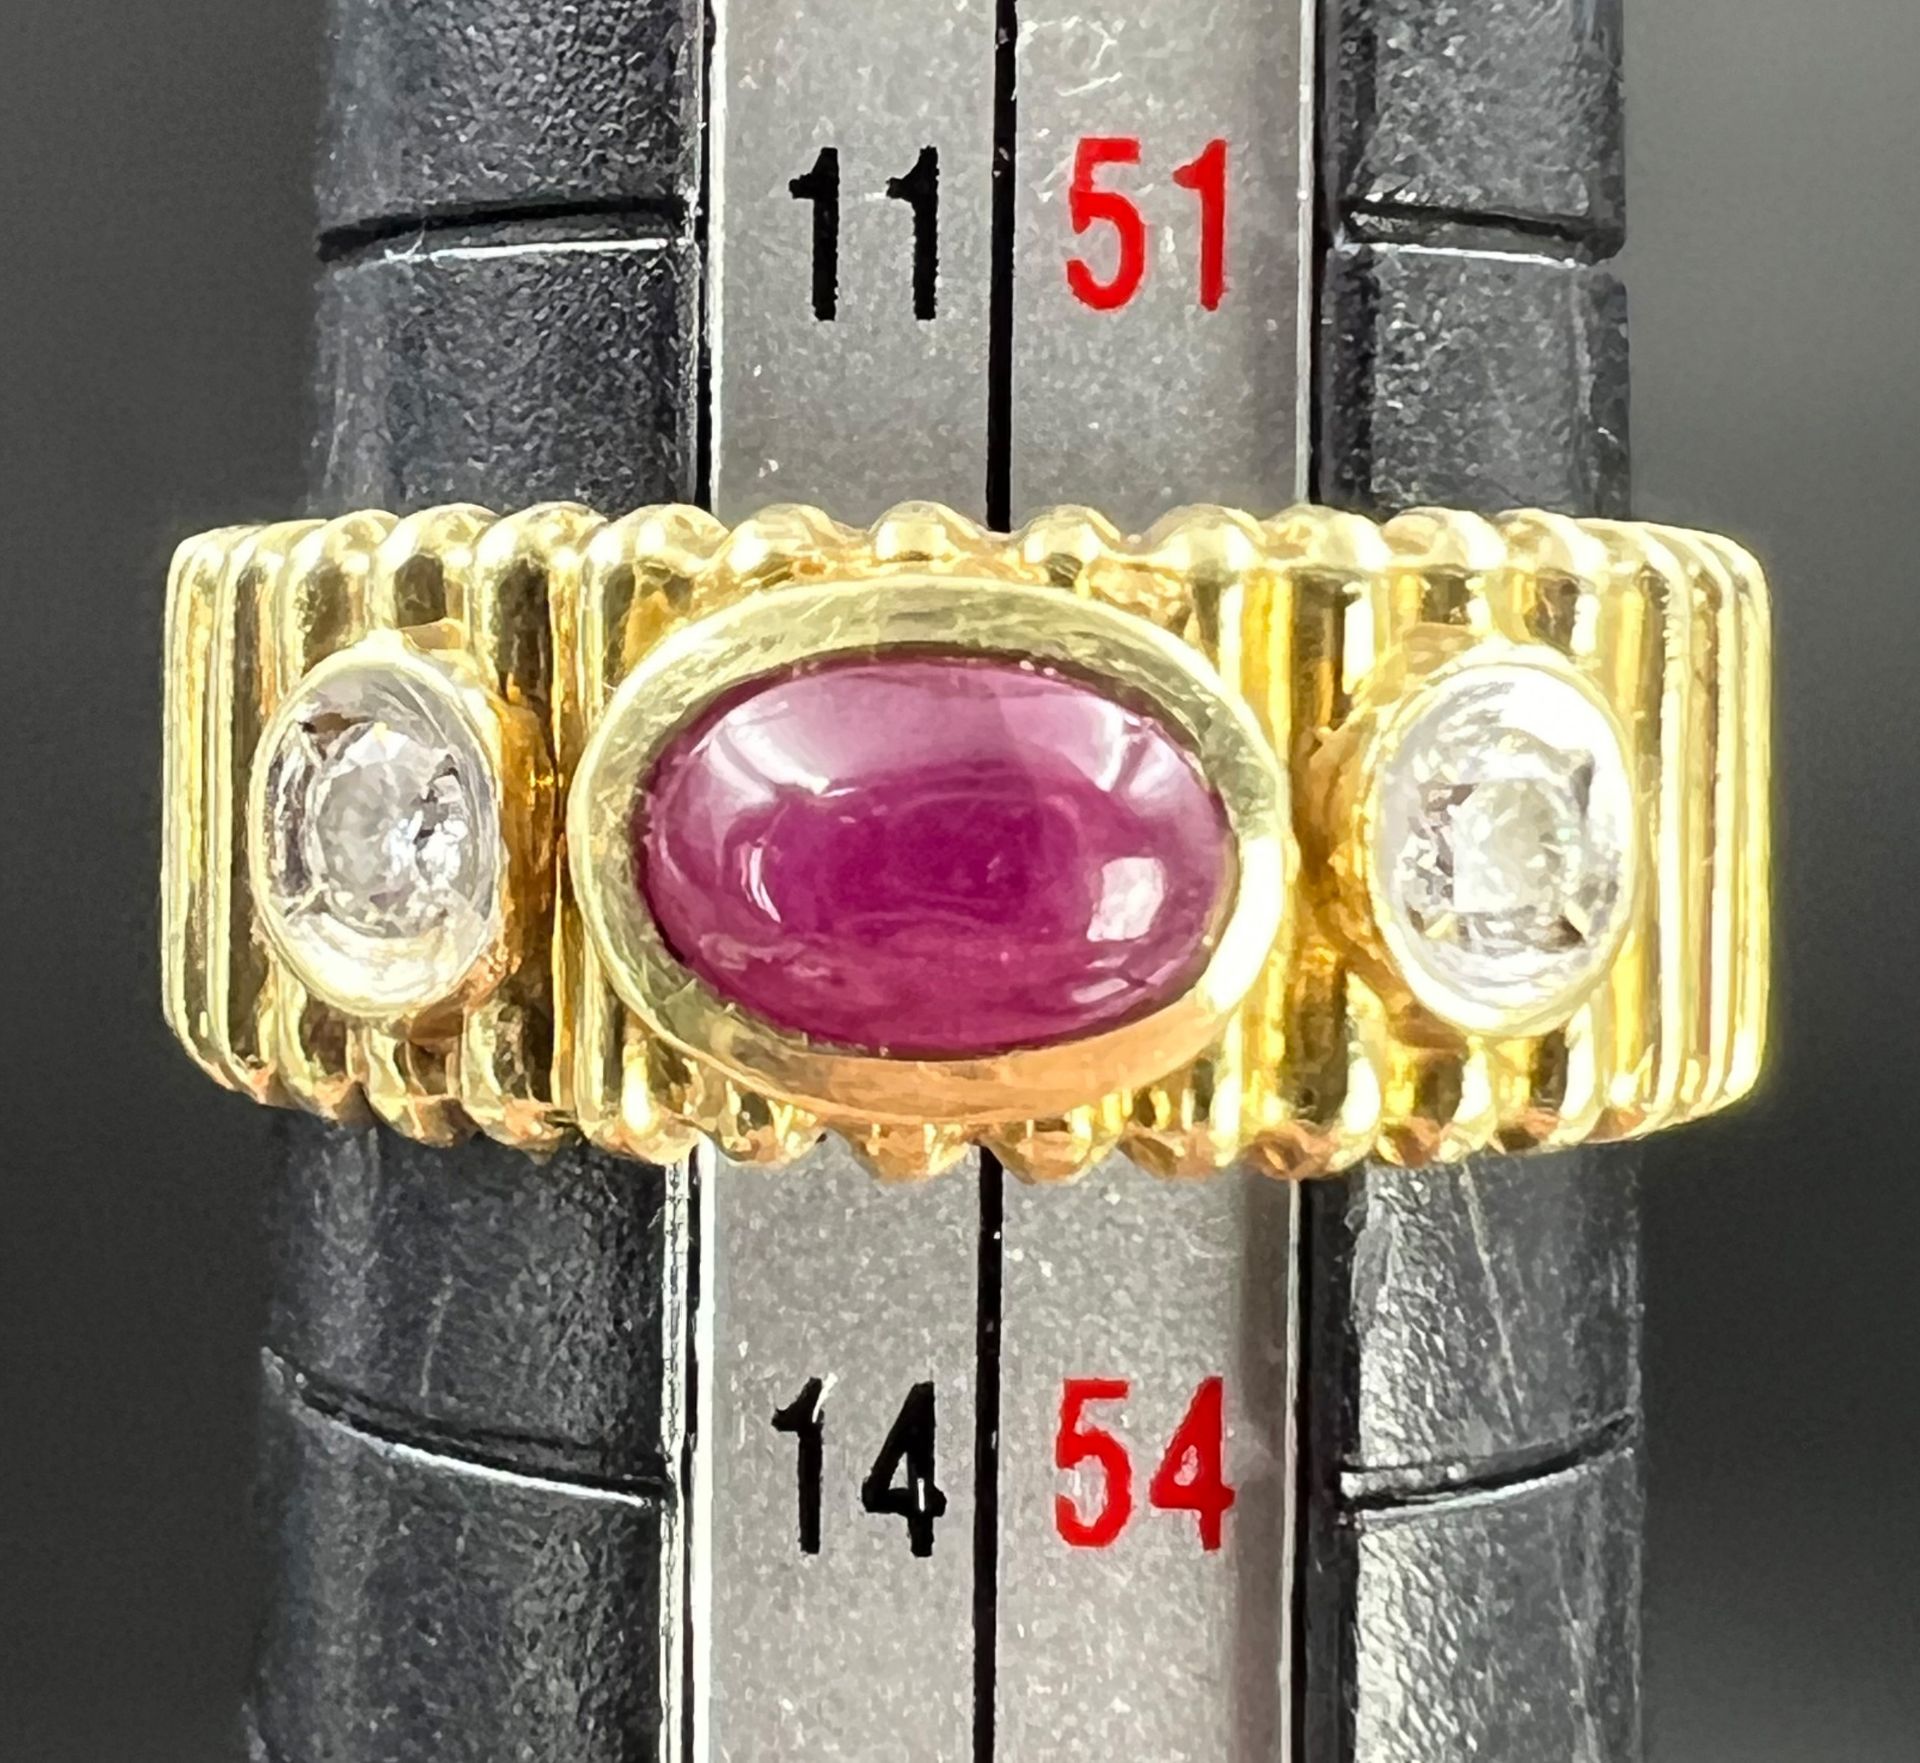 Ladies' ring. 585 yellow gold. 1 coloured stone cabochon and 2 small diamonds. - Image 4 of 8